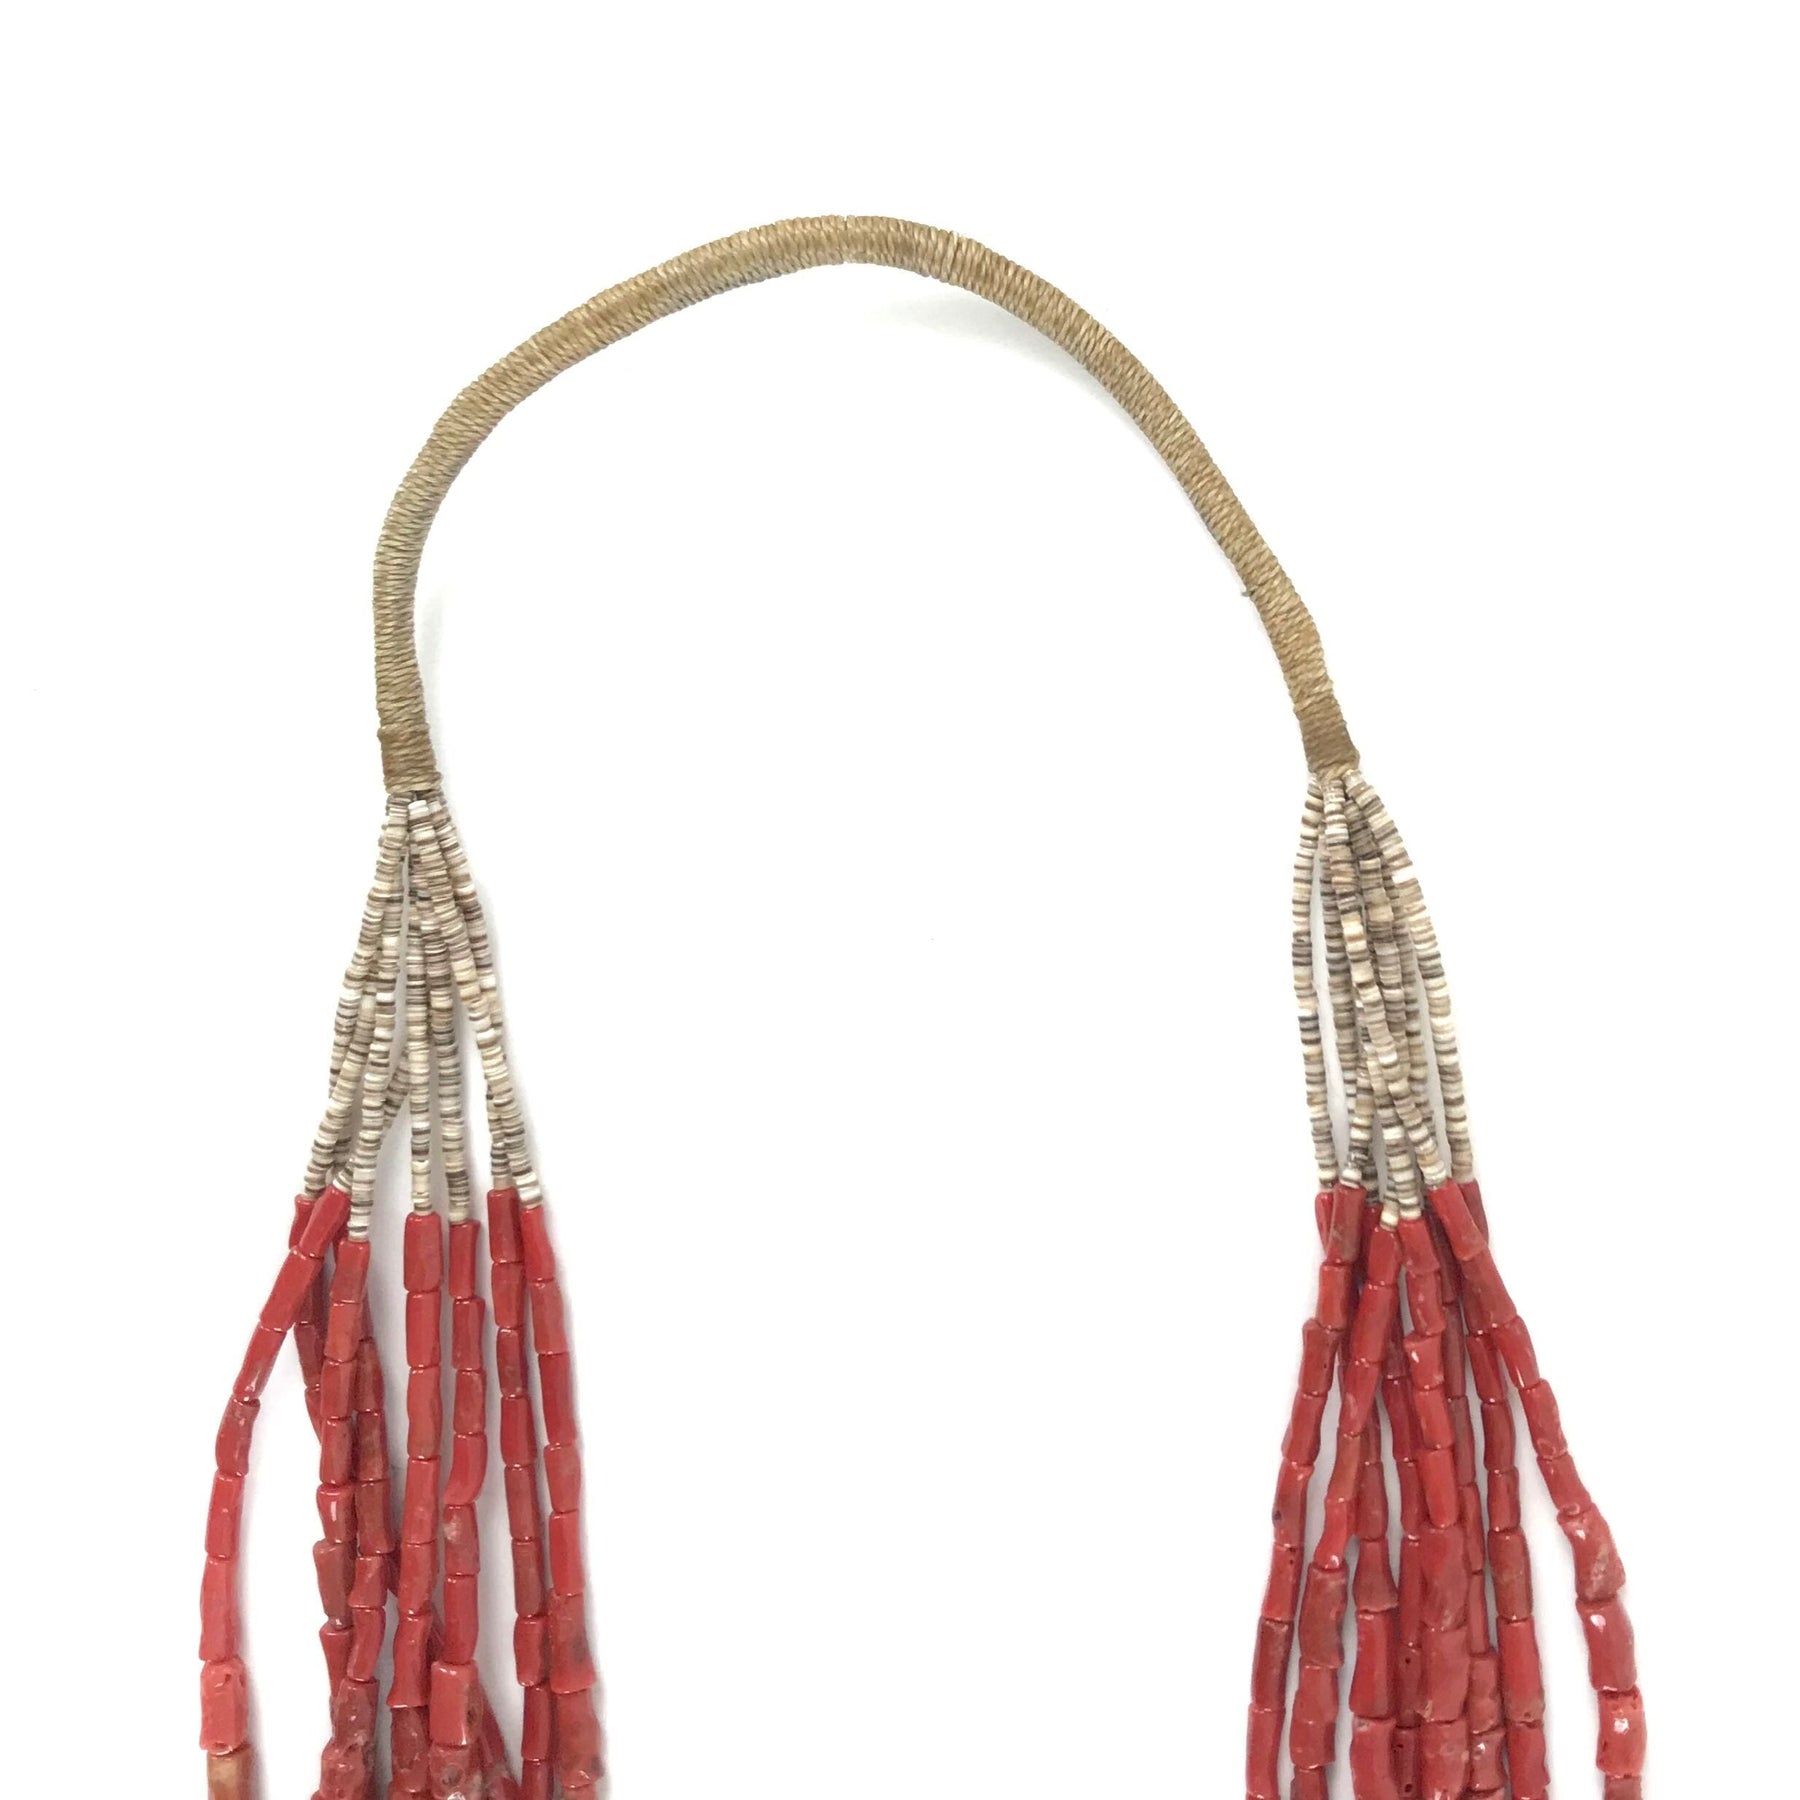 Coral Pearl Cage Necklace - The Rubin Museum of Art Online Shop